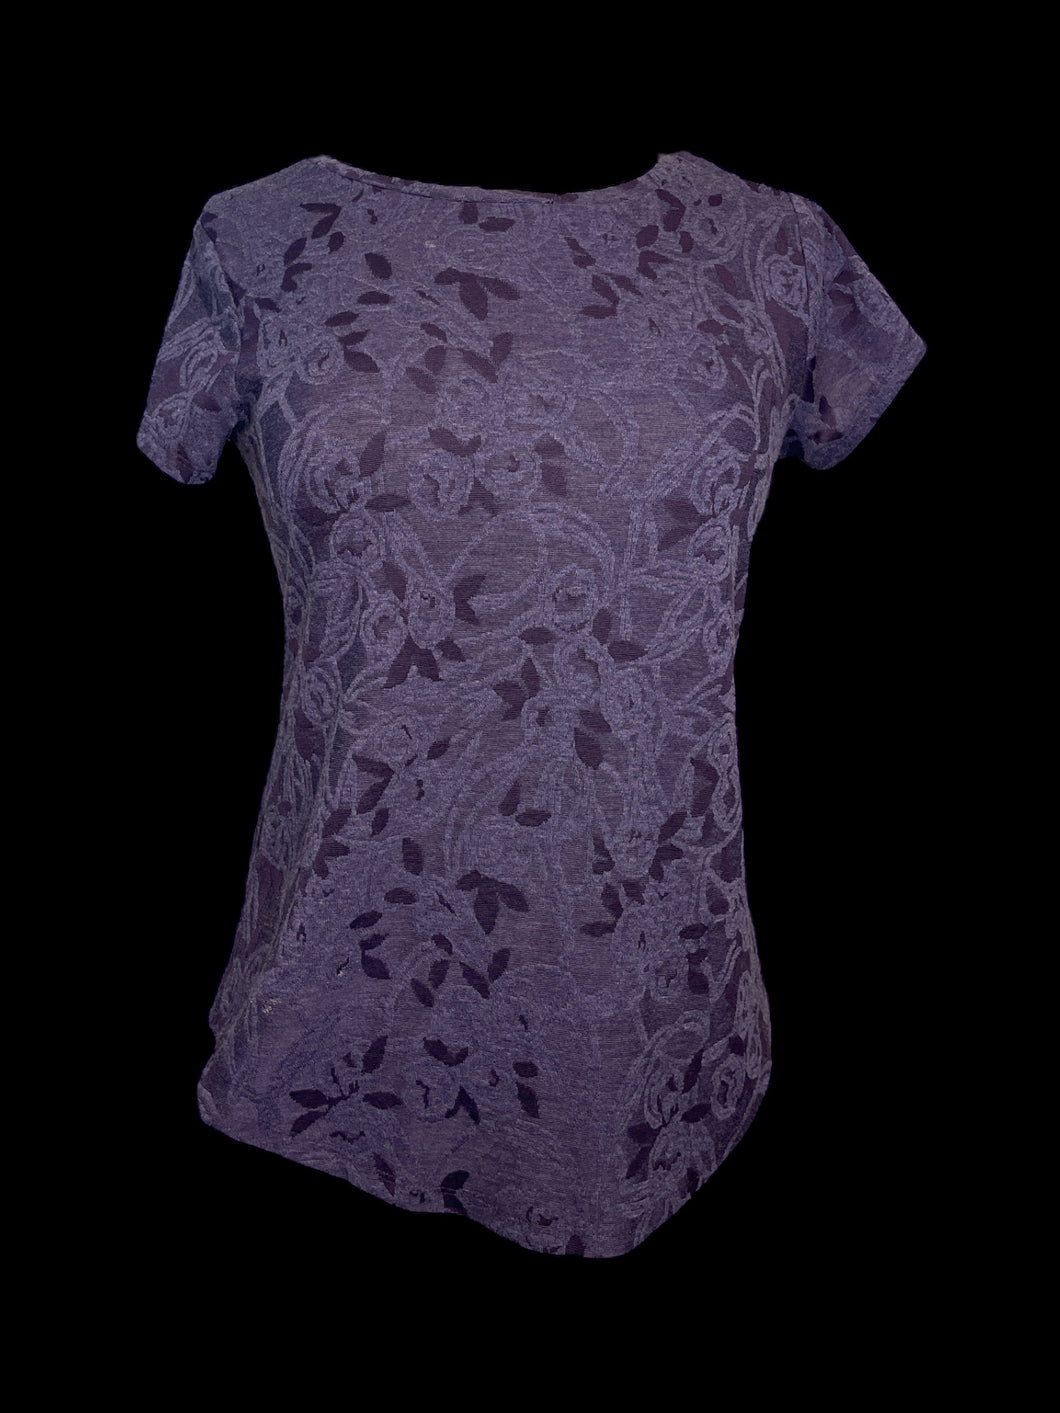 M Plum short sleeve scoop neck top w/ textured abstract floral design